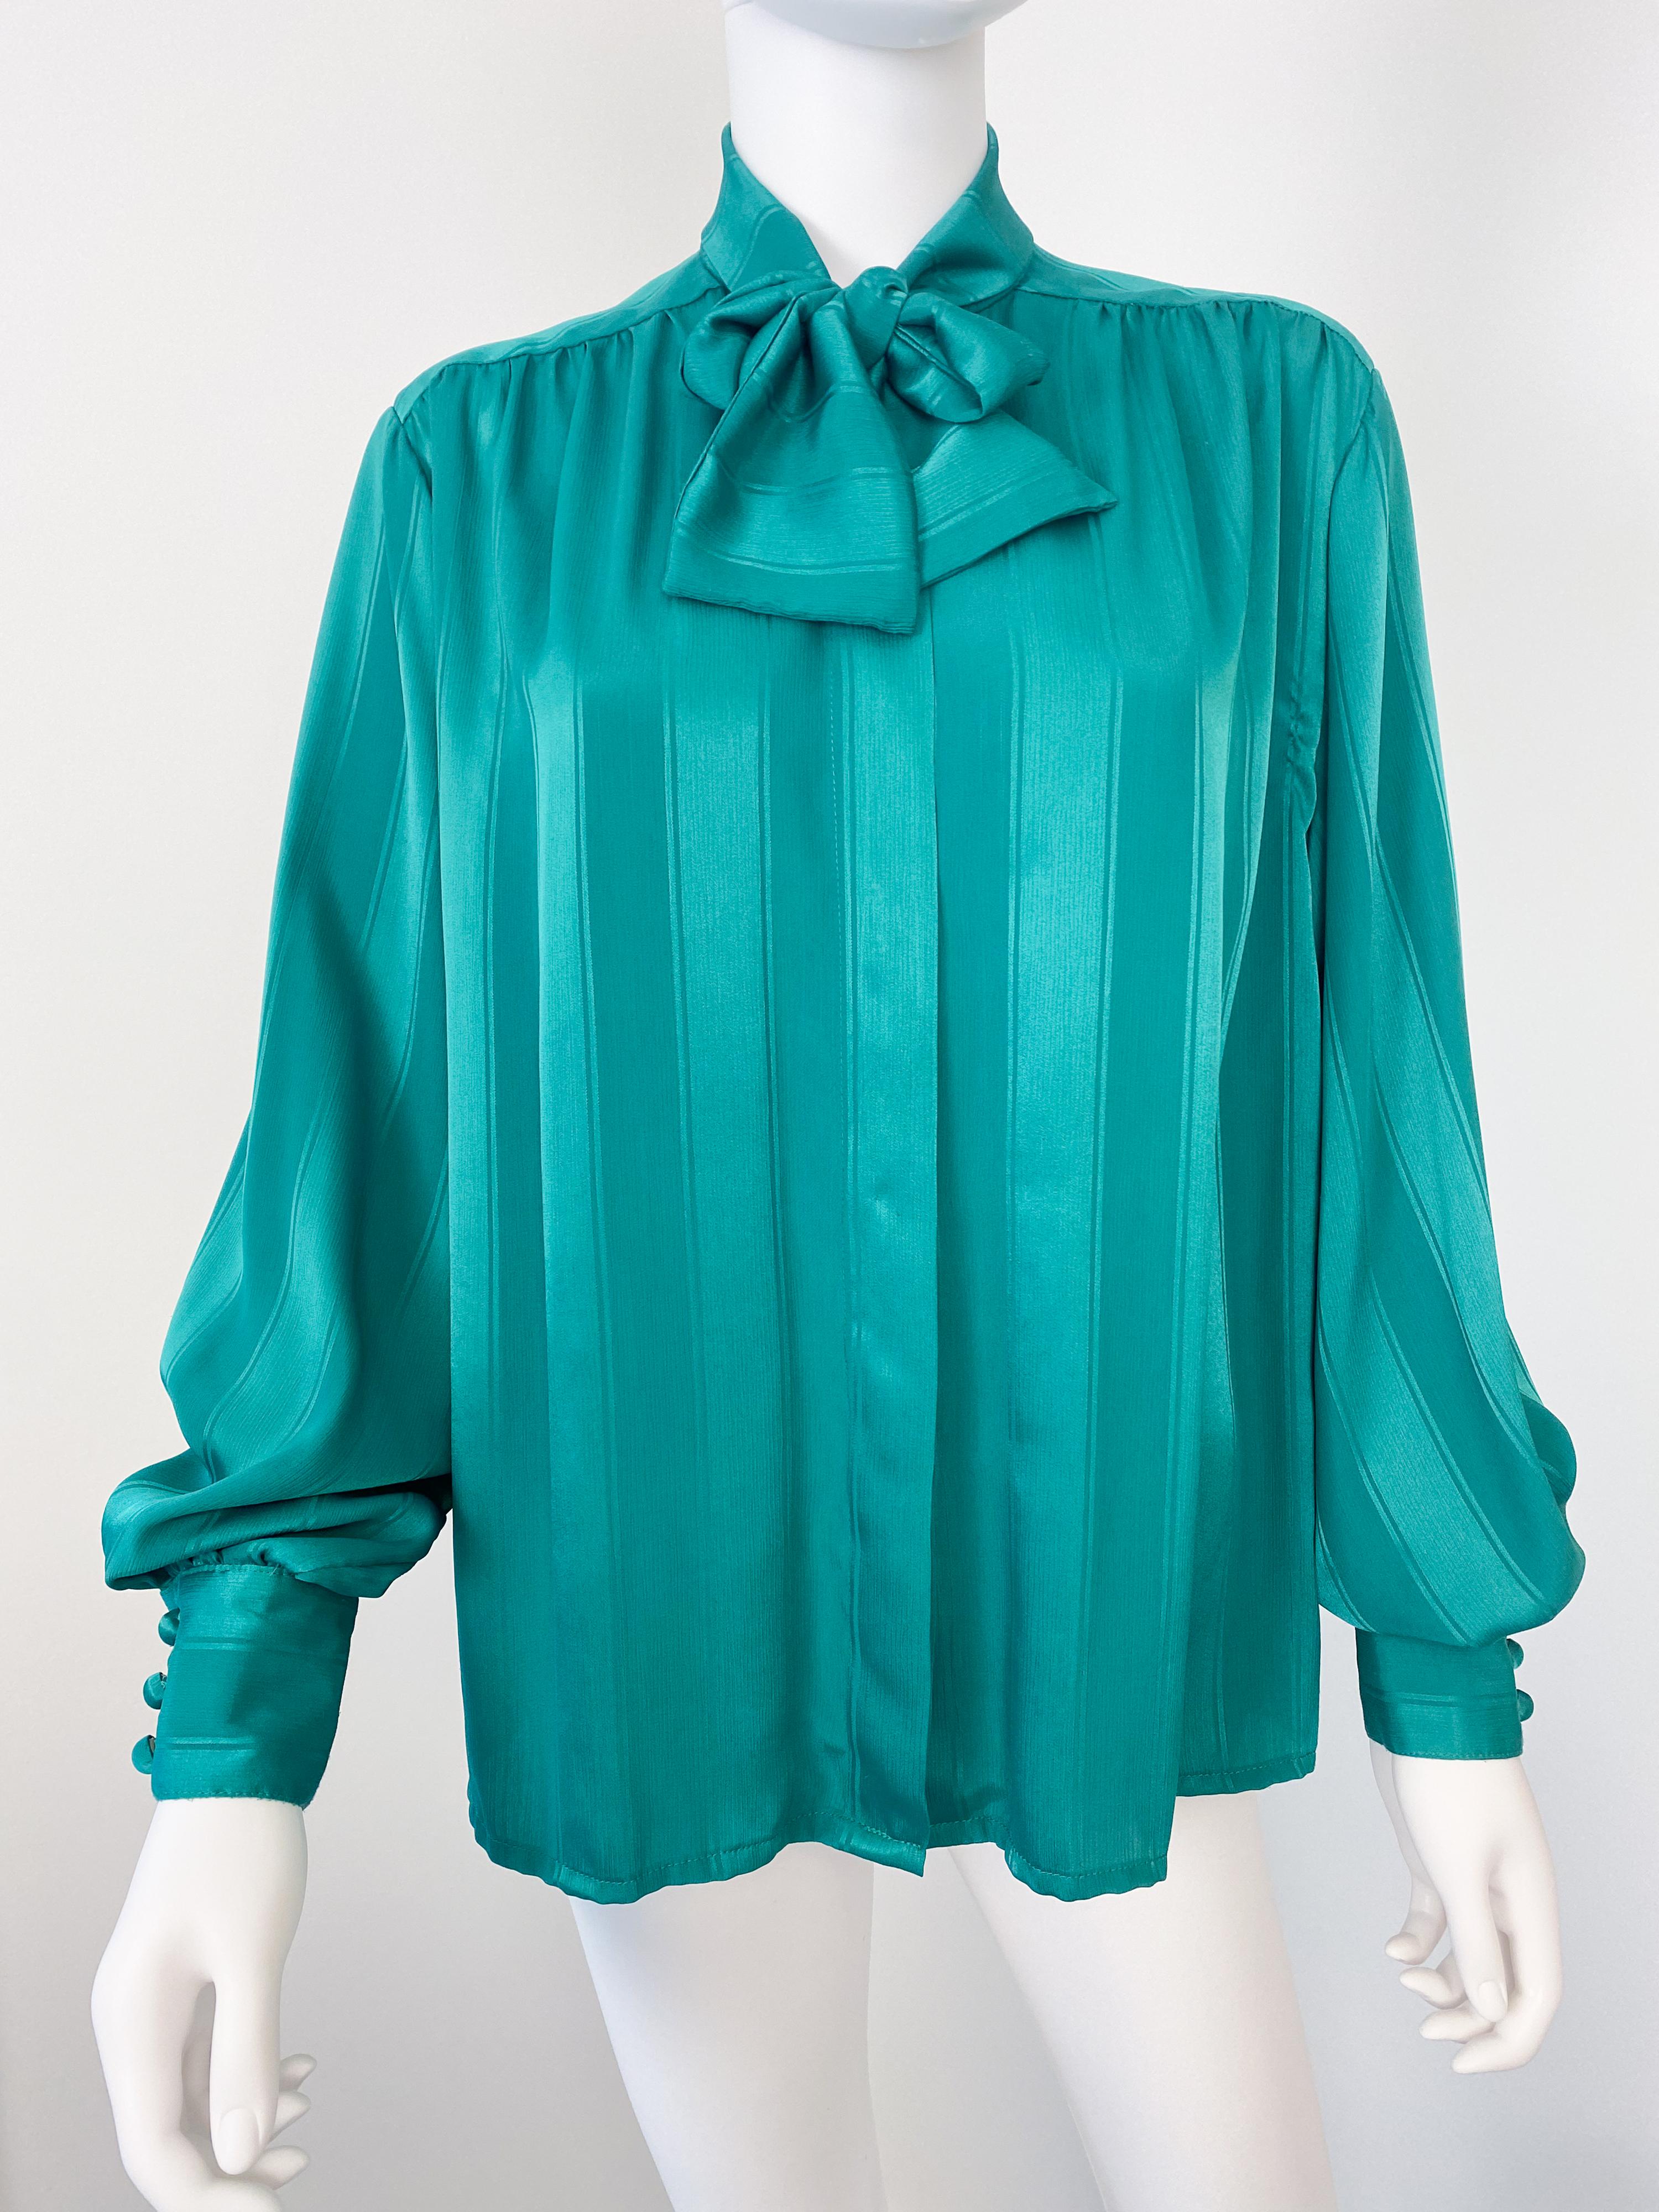 Vintage 1980s Silky Polyester Bow Blouse Top Emerald Green Stripes Size 12/14 For Sale 6